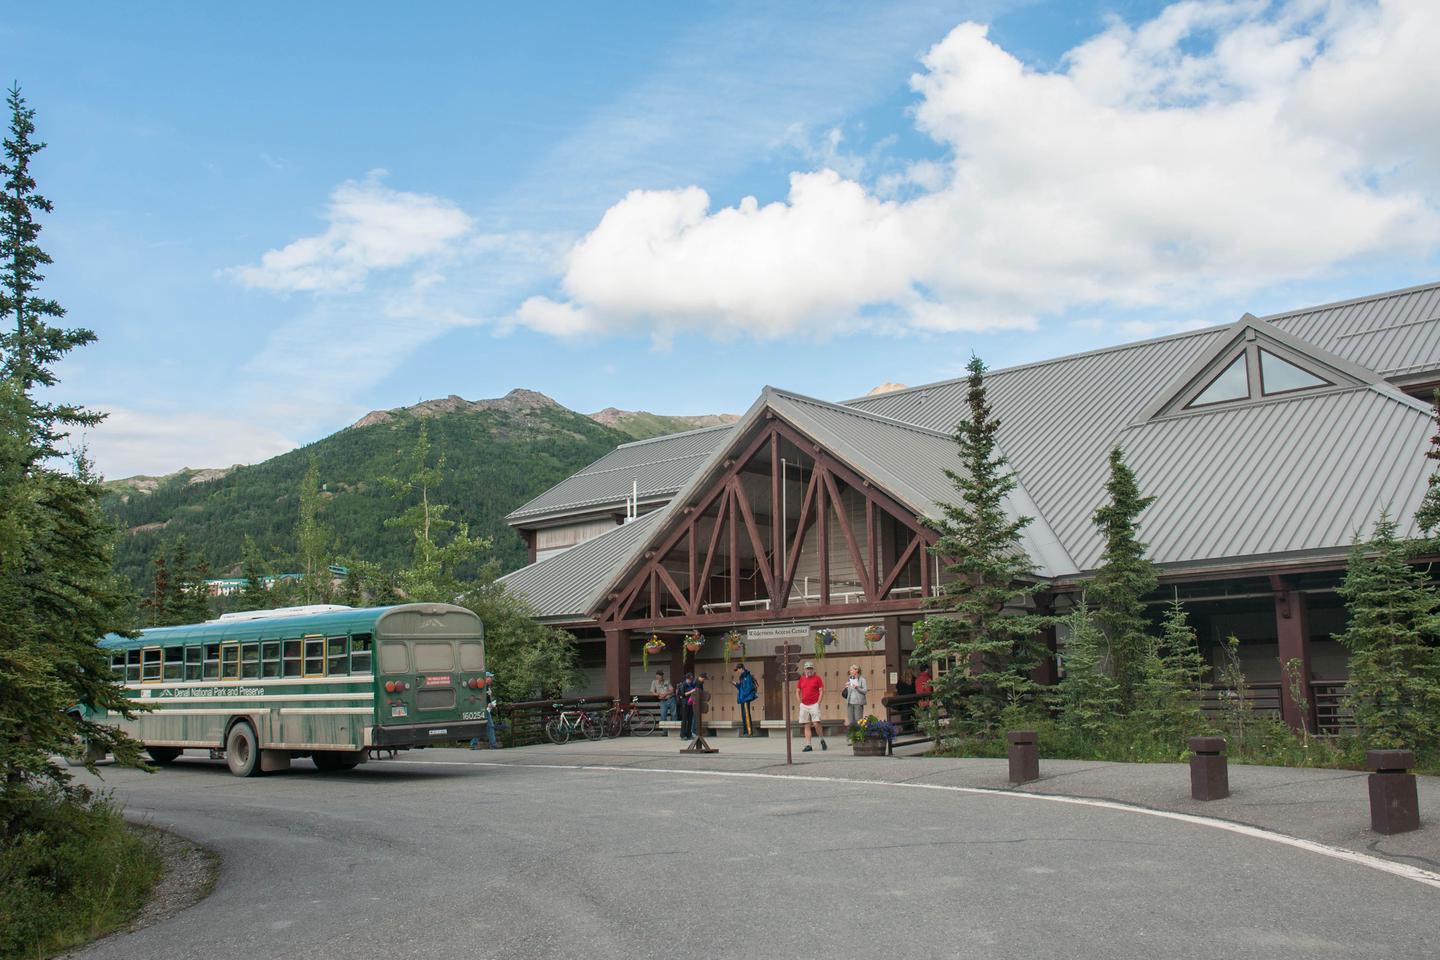 Denali Bus DepotThe Denali Bus Depot is the starting point for most bus trips into Denali